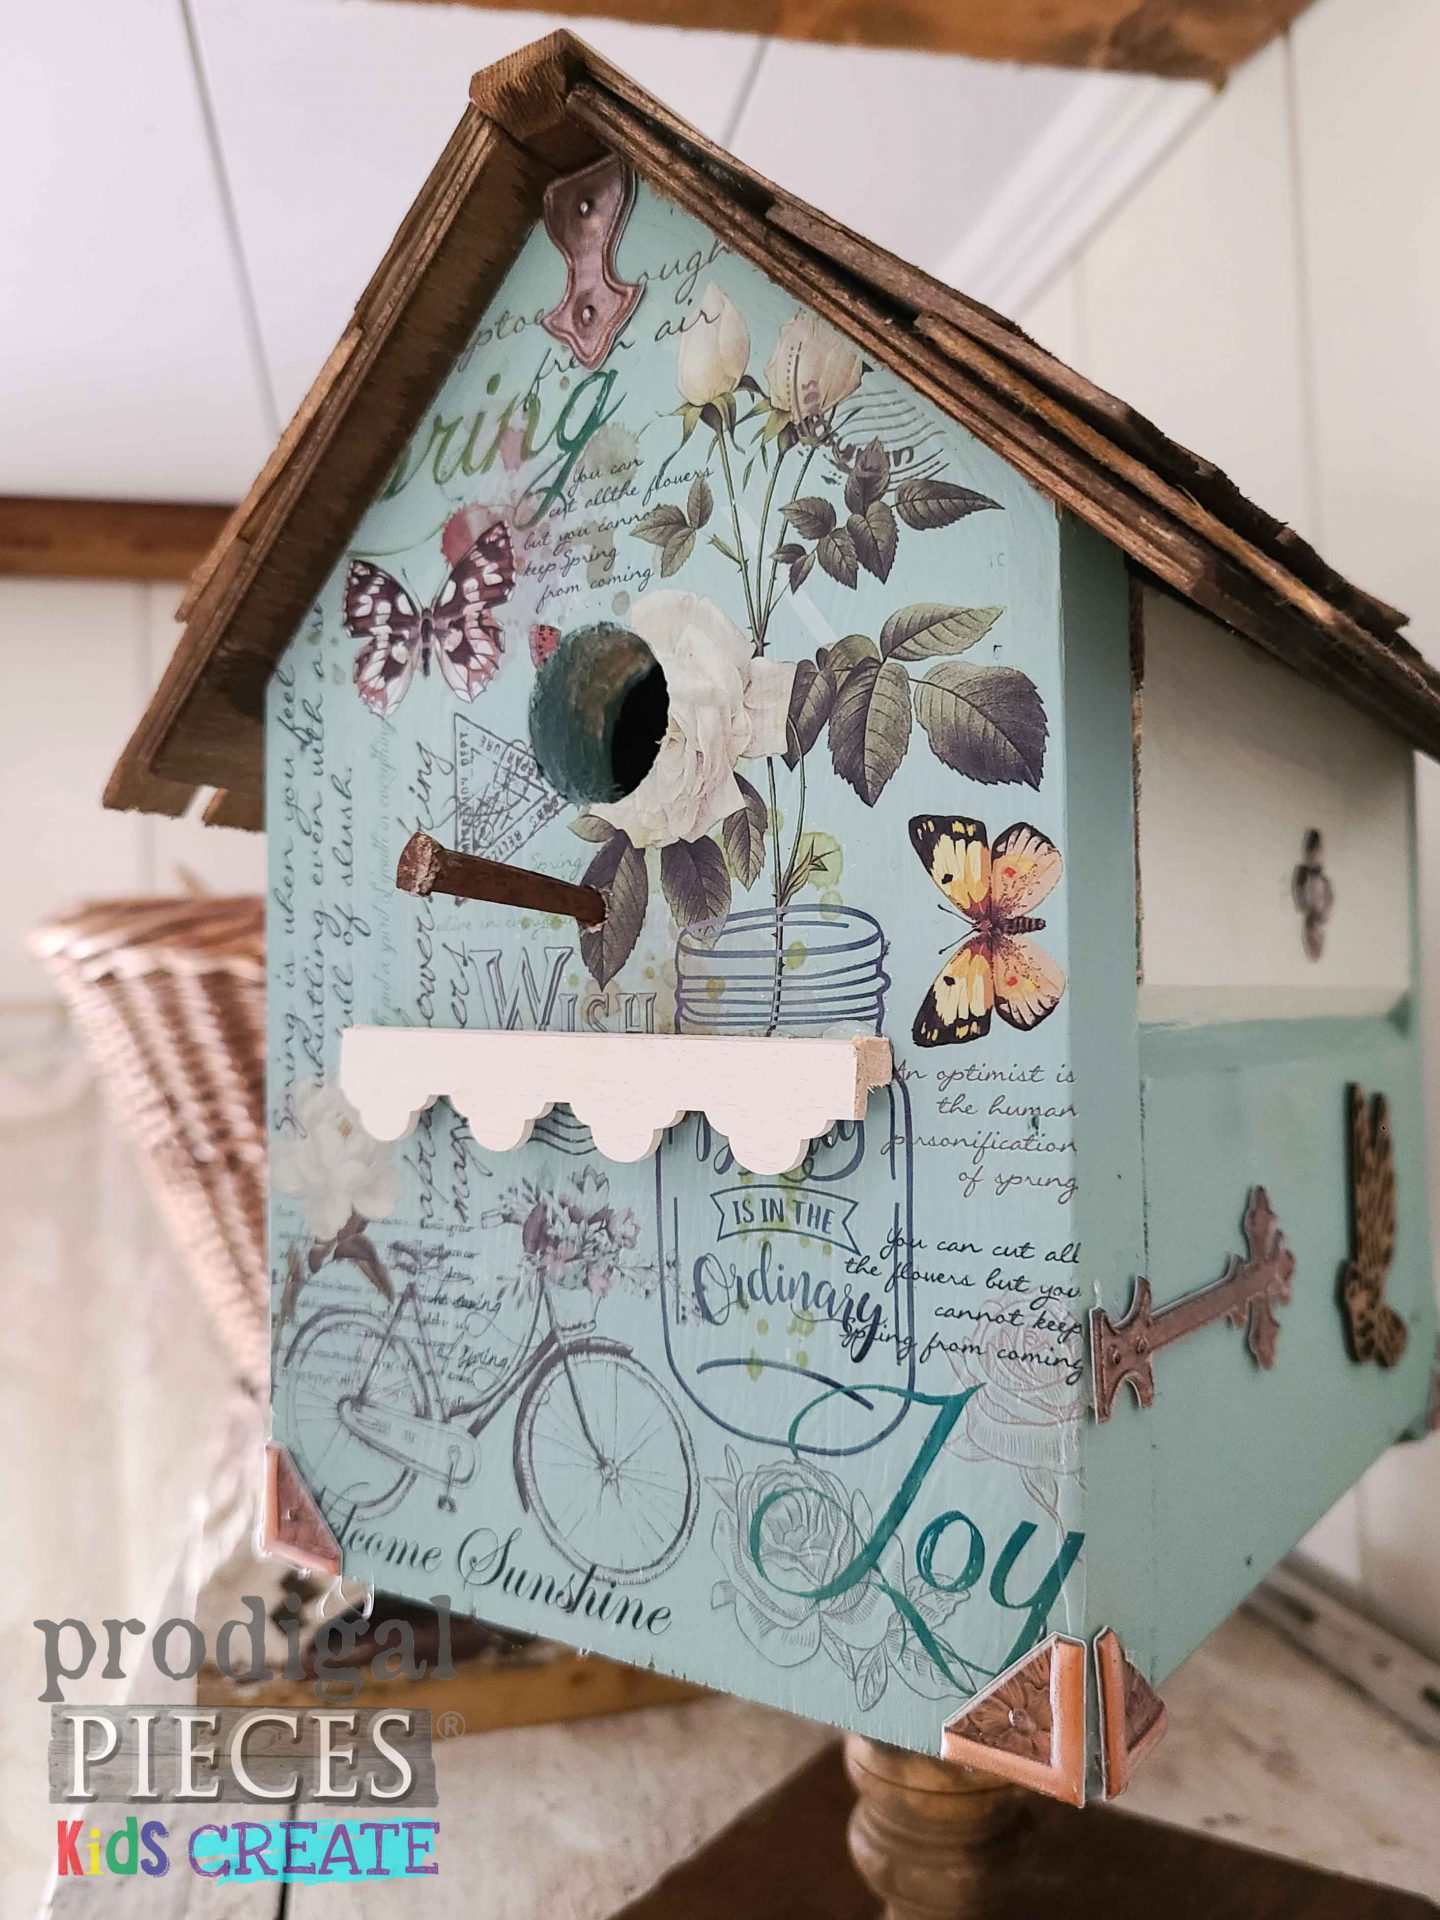 Cottage Style Birdhouse from Prodigal Pieces KIDS Create Tutorail at prodigalpieces.com #prodigalpieces #cottage #birdhouse #diy